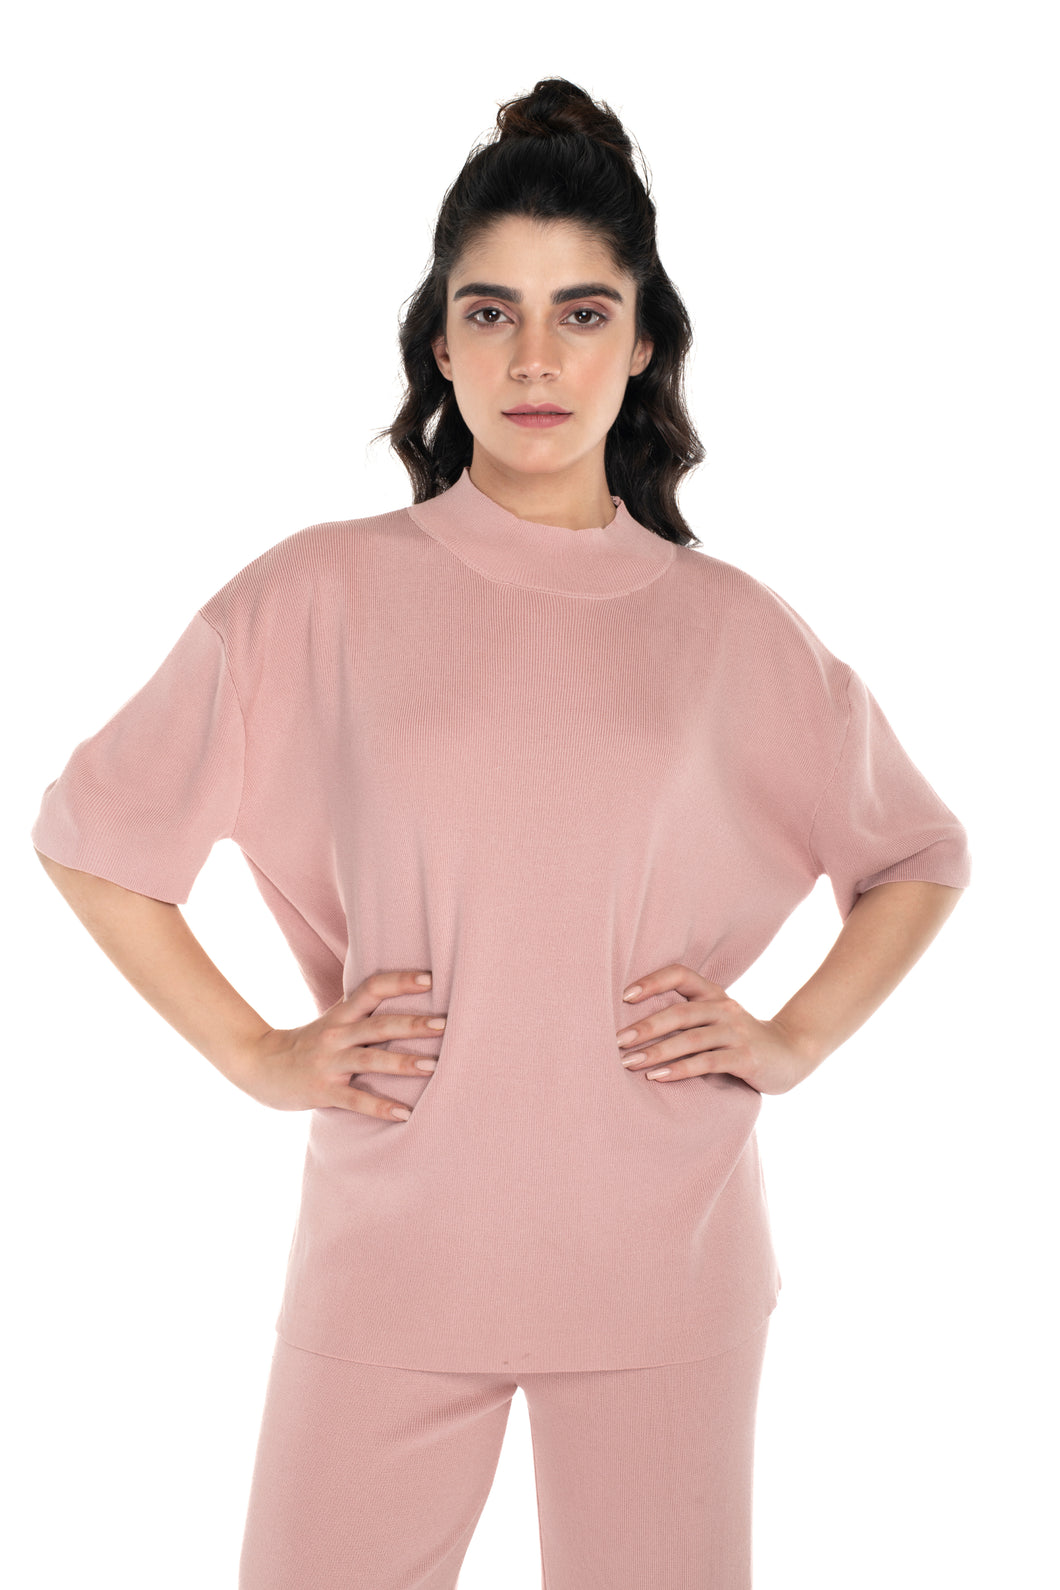 The Ultimate Airport Ready Co-ord set Light Pink lounge wear featured